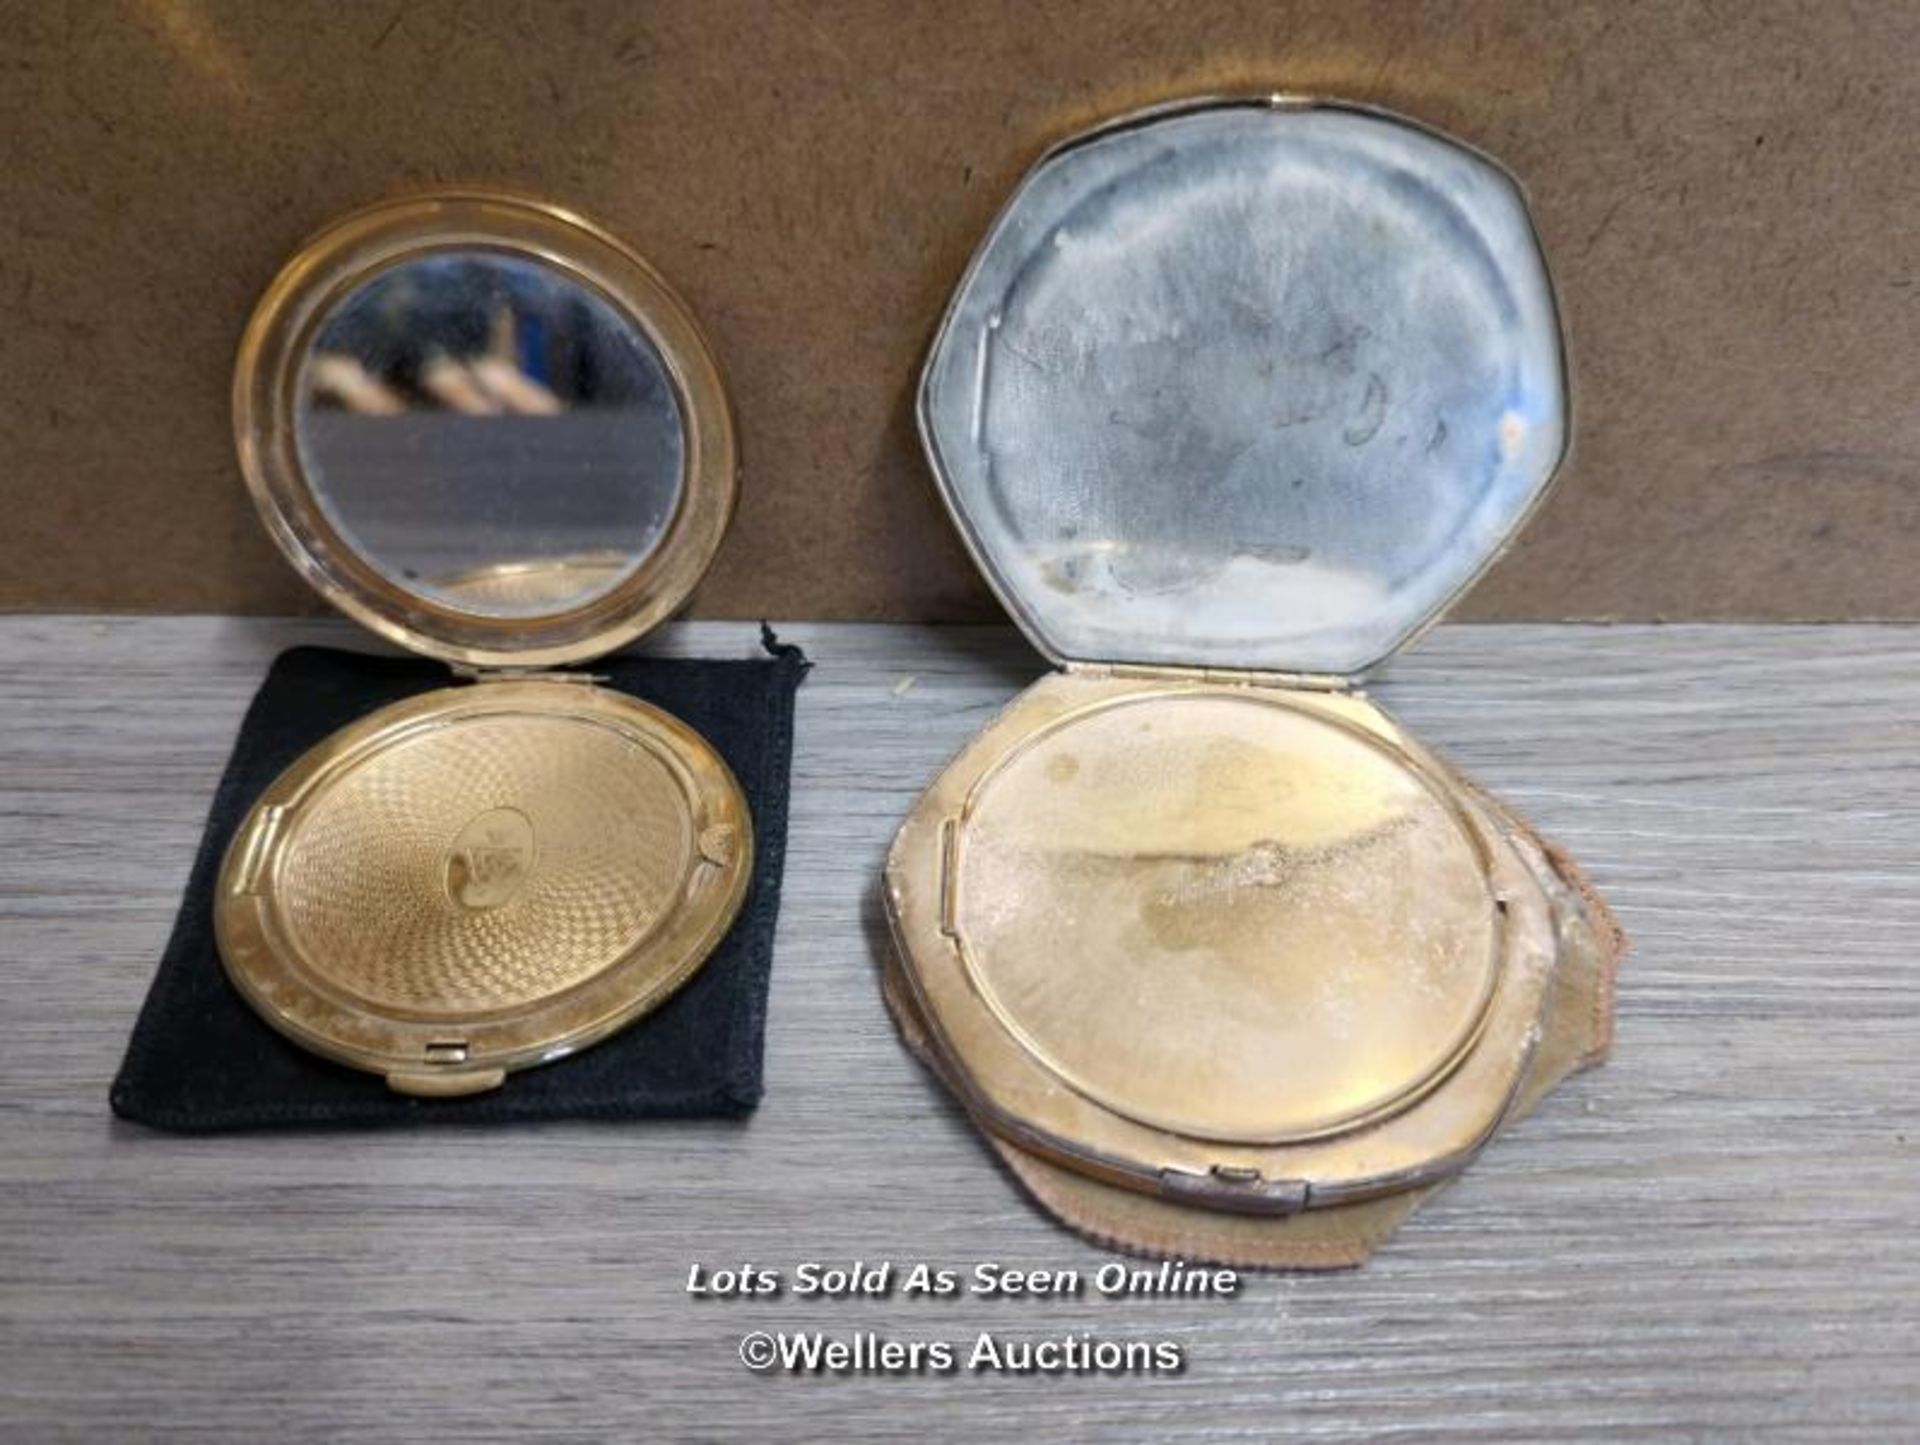 TWO VINTAGE POWDER COMPACTS - Image 2 of 5